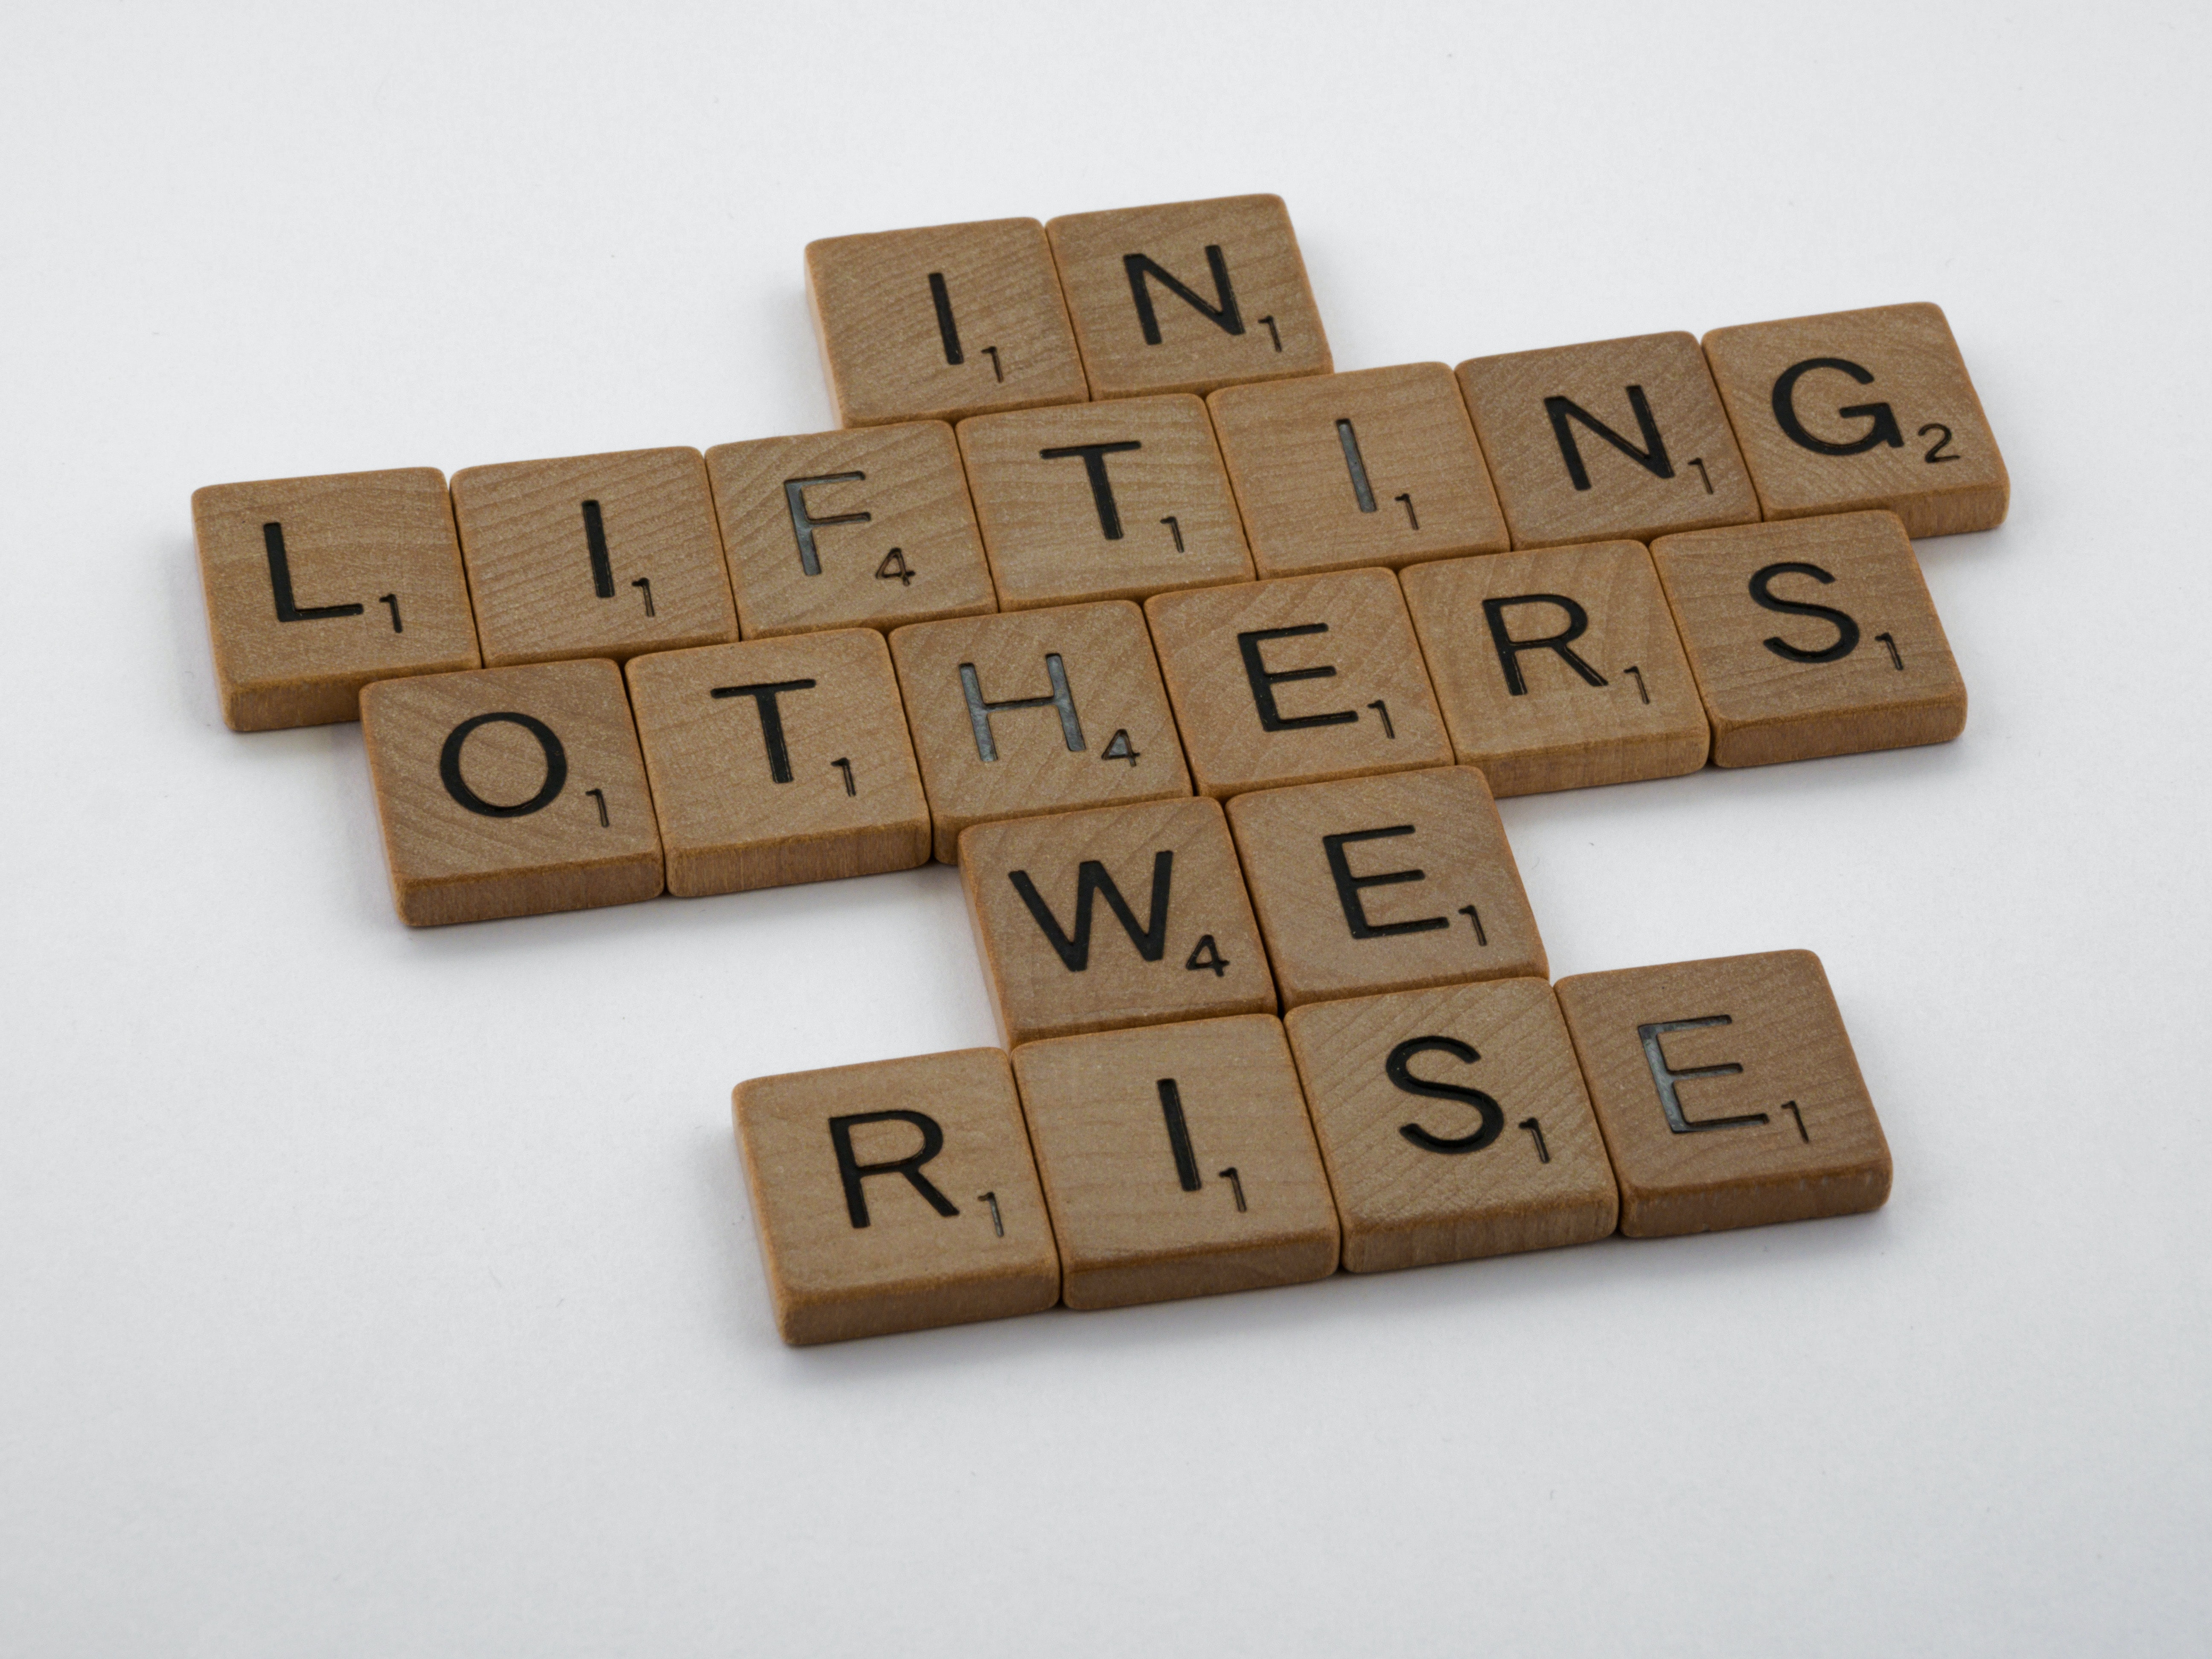 Scrabble Pieces making the words:  In lifting others we rise